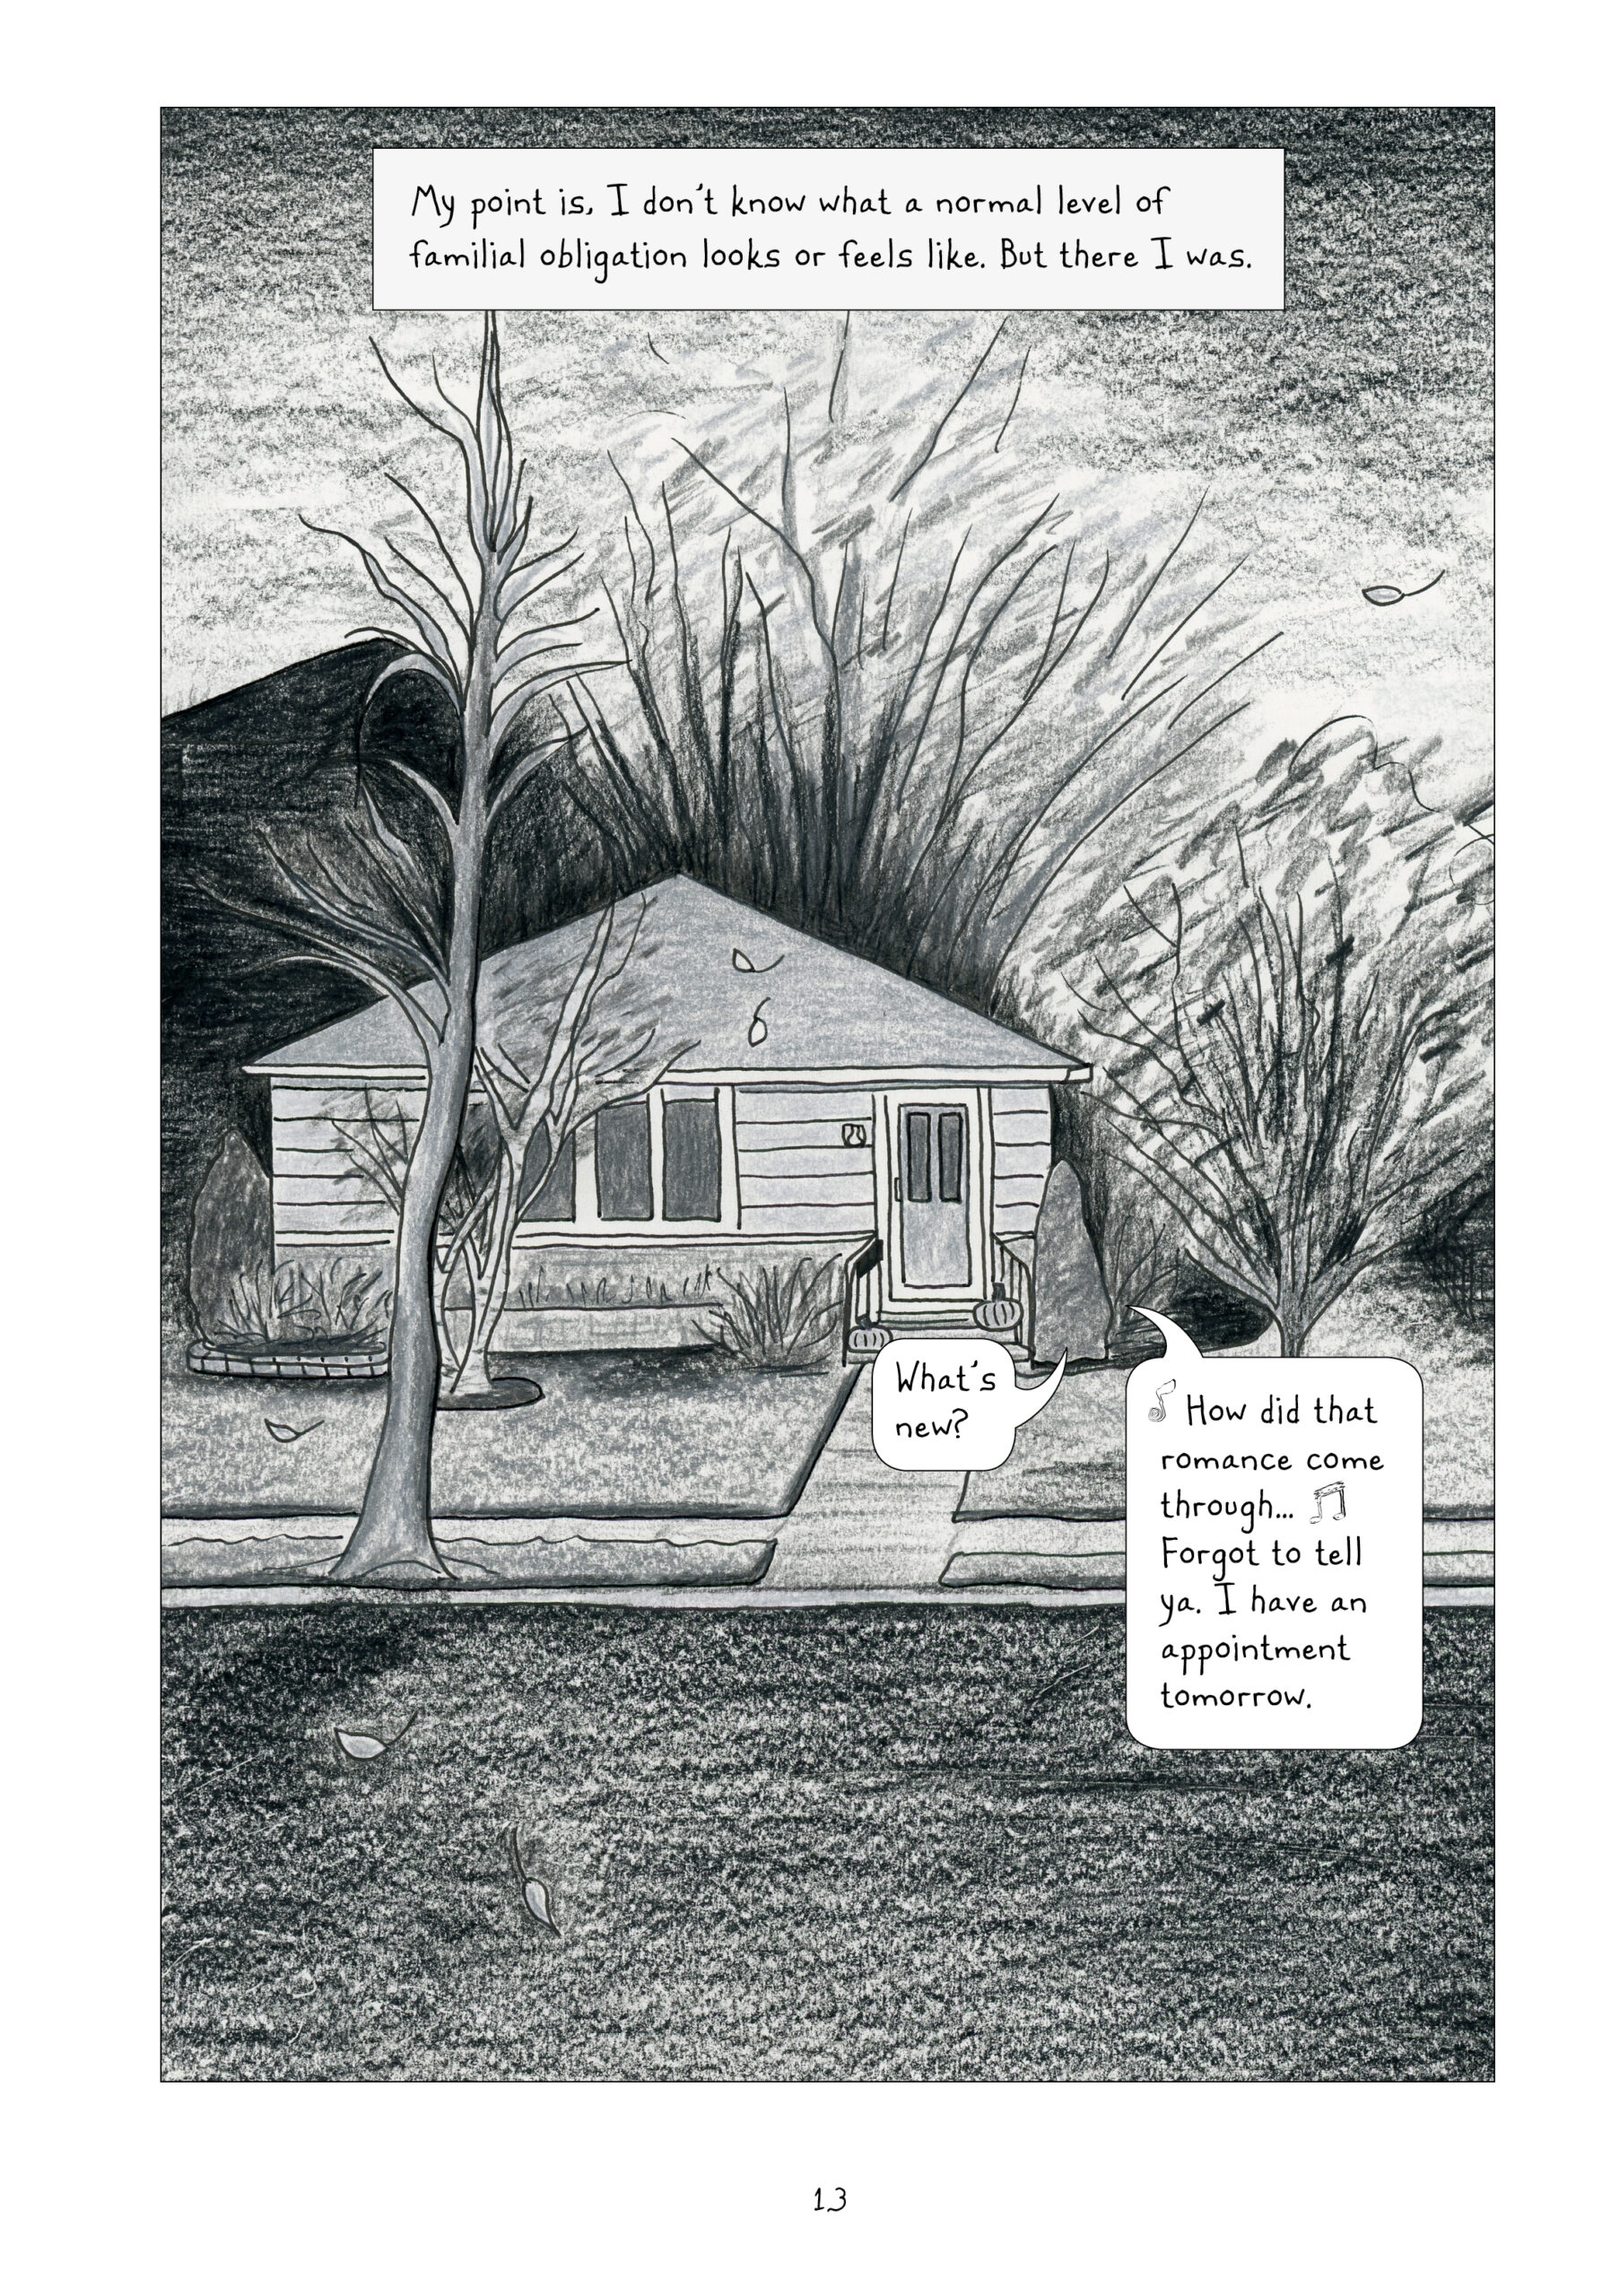 A full page black and white panel of a house surrounded by trees with whisker-like branches. There are two pumpkins on the stairs leading up to the front door. Two speech bubbles come out of the house. The first reads, "What's new?" The second replies in song, "How did that romance come through..." Then in speech, "Forgot to tell ya. I have an appointment tomorrow."

Lynn narrates: "My point is, I don't know what a normal level of familial obligation looks or feels like. But there I was."